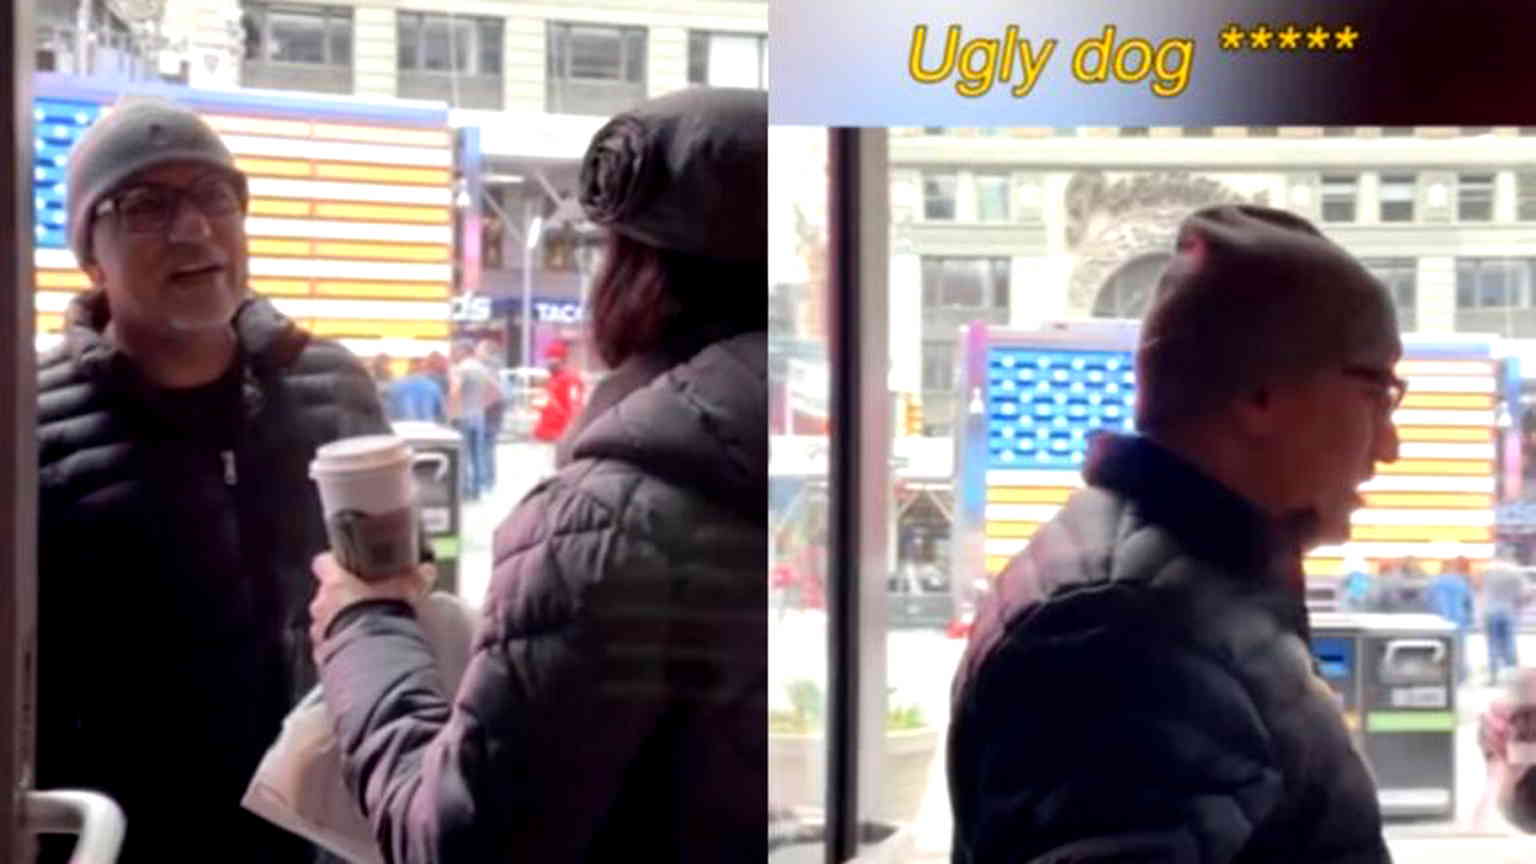 ‘KPOP’ Broadway actor experiences racist incident at Starbucks in NYC